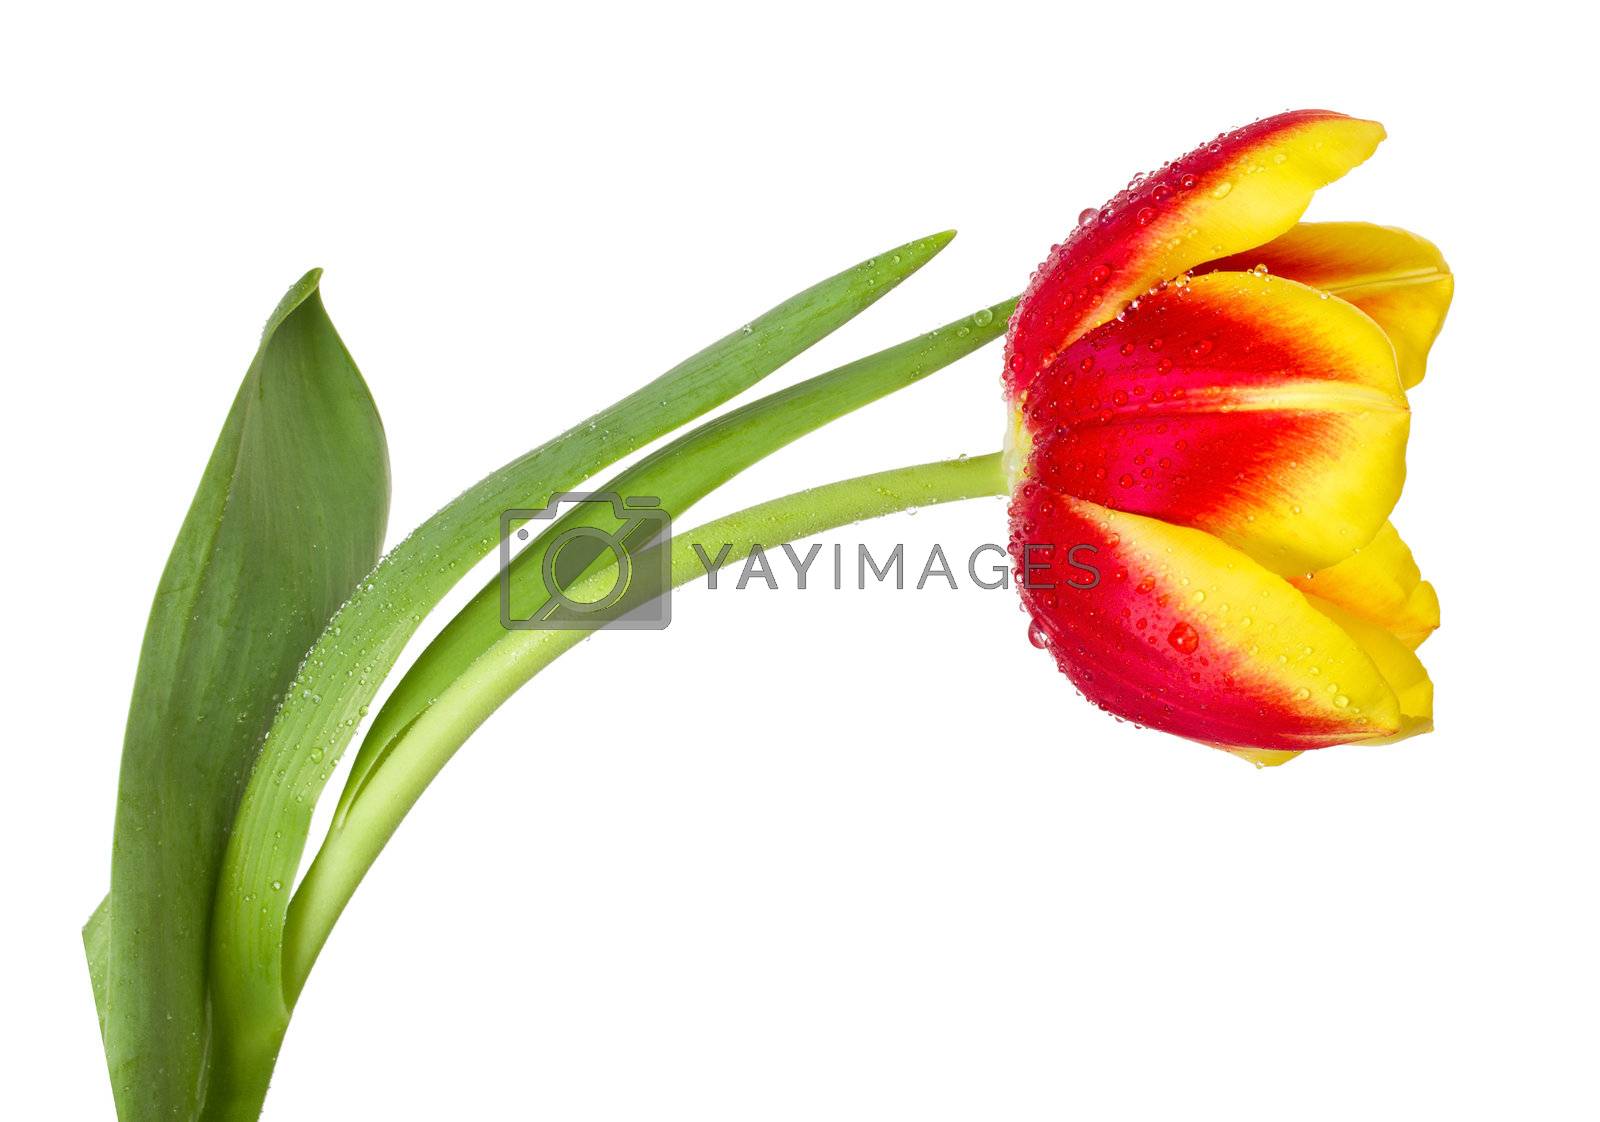 Royalty free image of red-yellow tulip by Alekcey